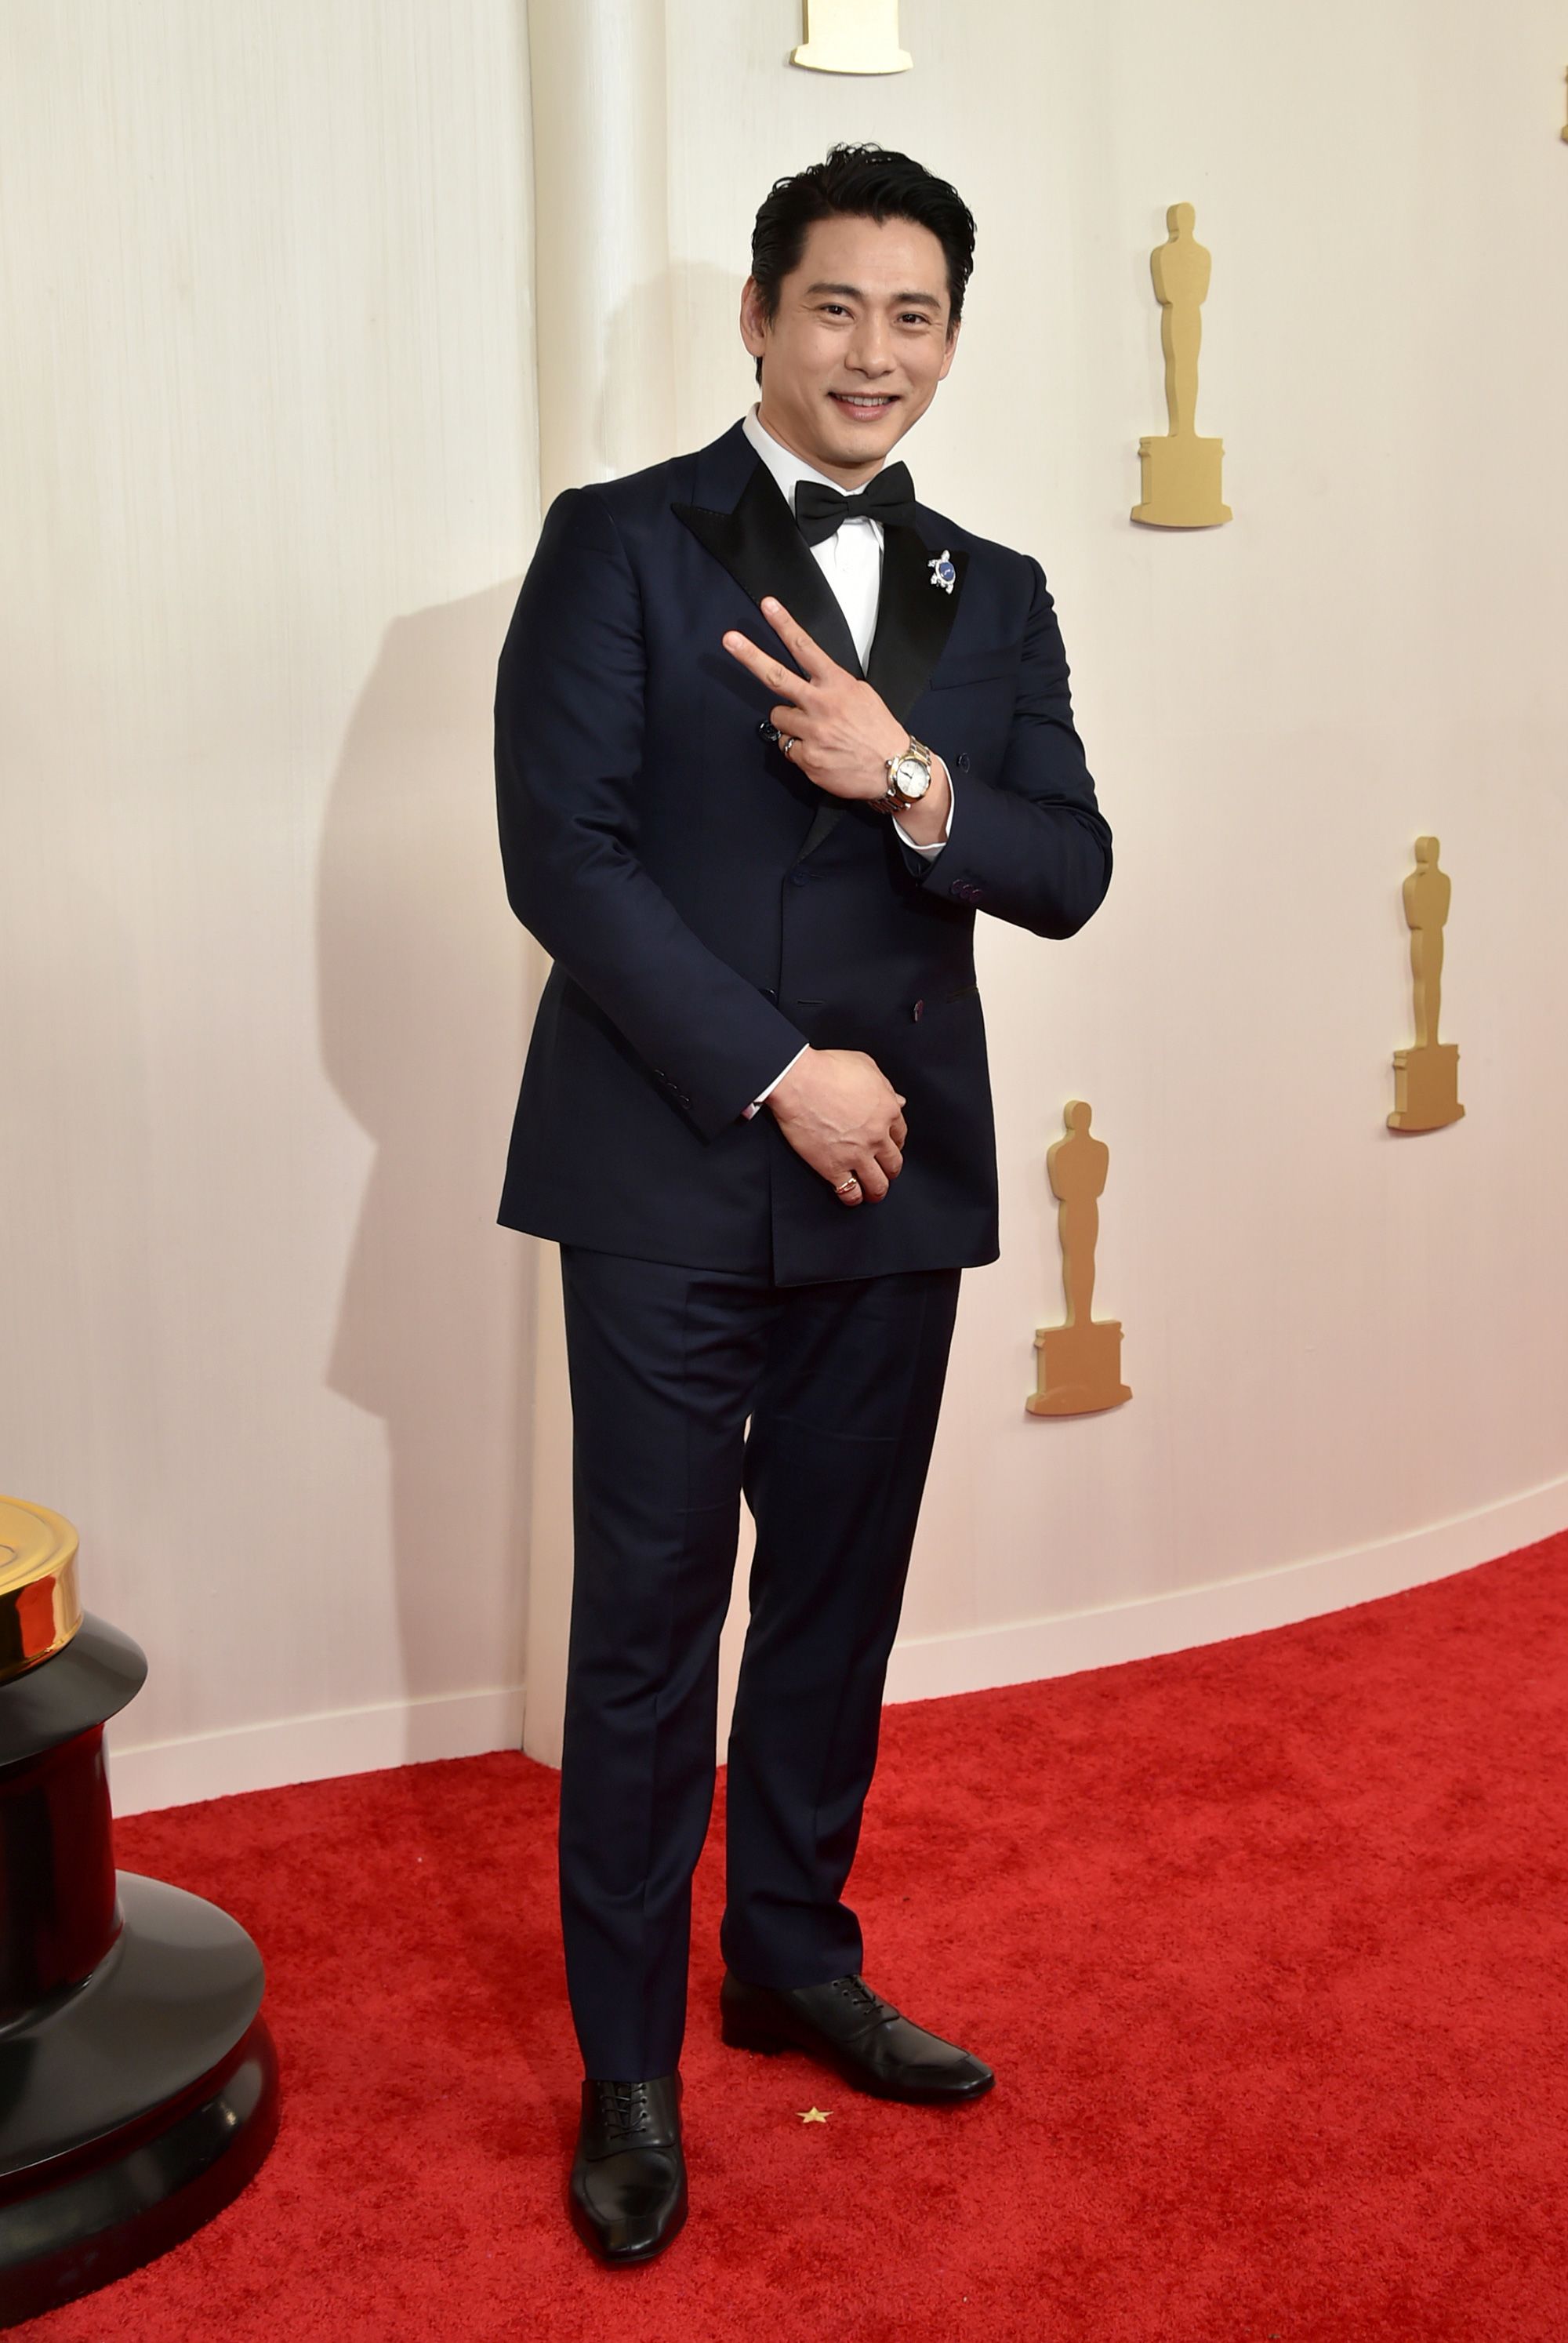 South Korean actor Teo Yoo wore a custom navy double-breasted Louis Vuitton suit. The “Past Lives” star finished off the look with a turtle pin honoring his late pet tortoise Momo, he told Variety on the red carpet.